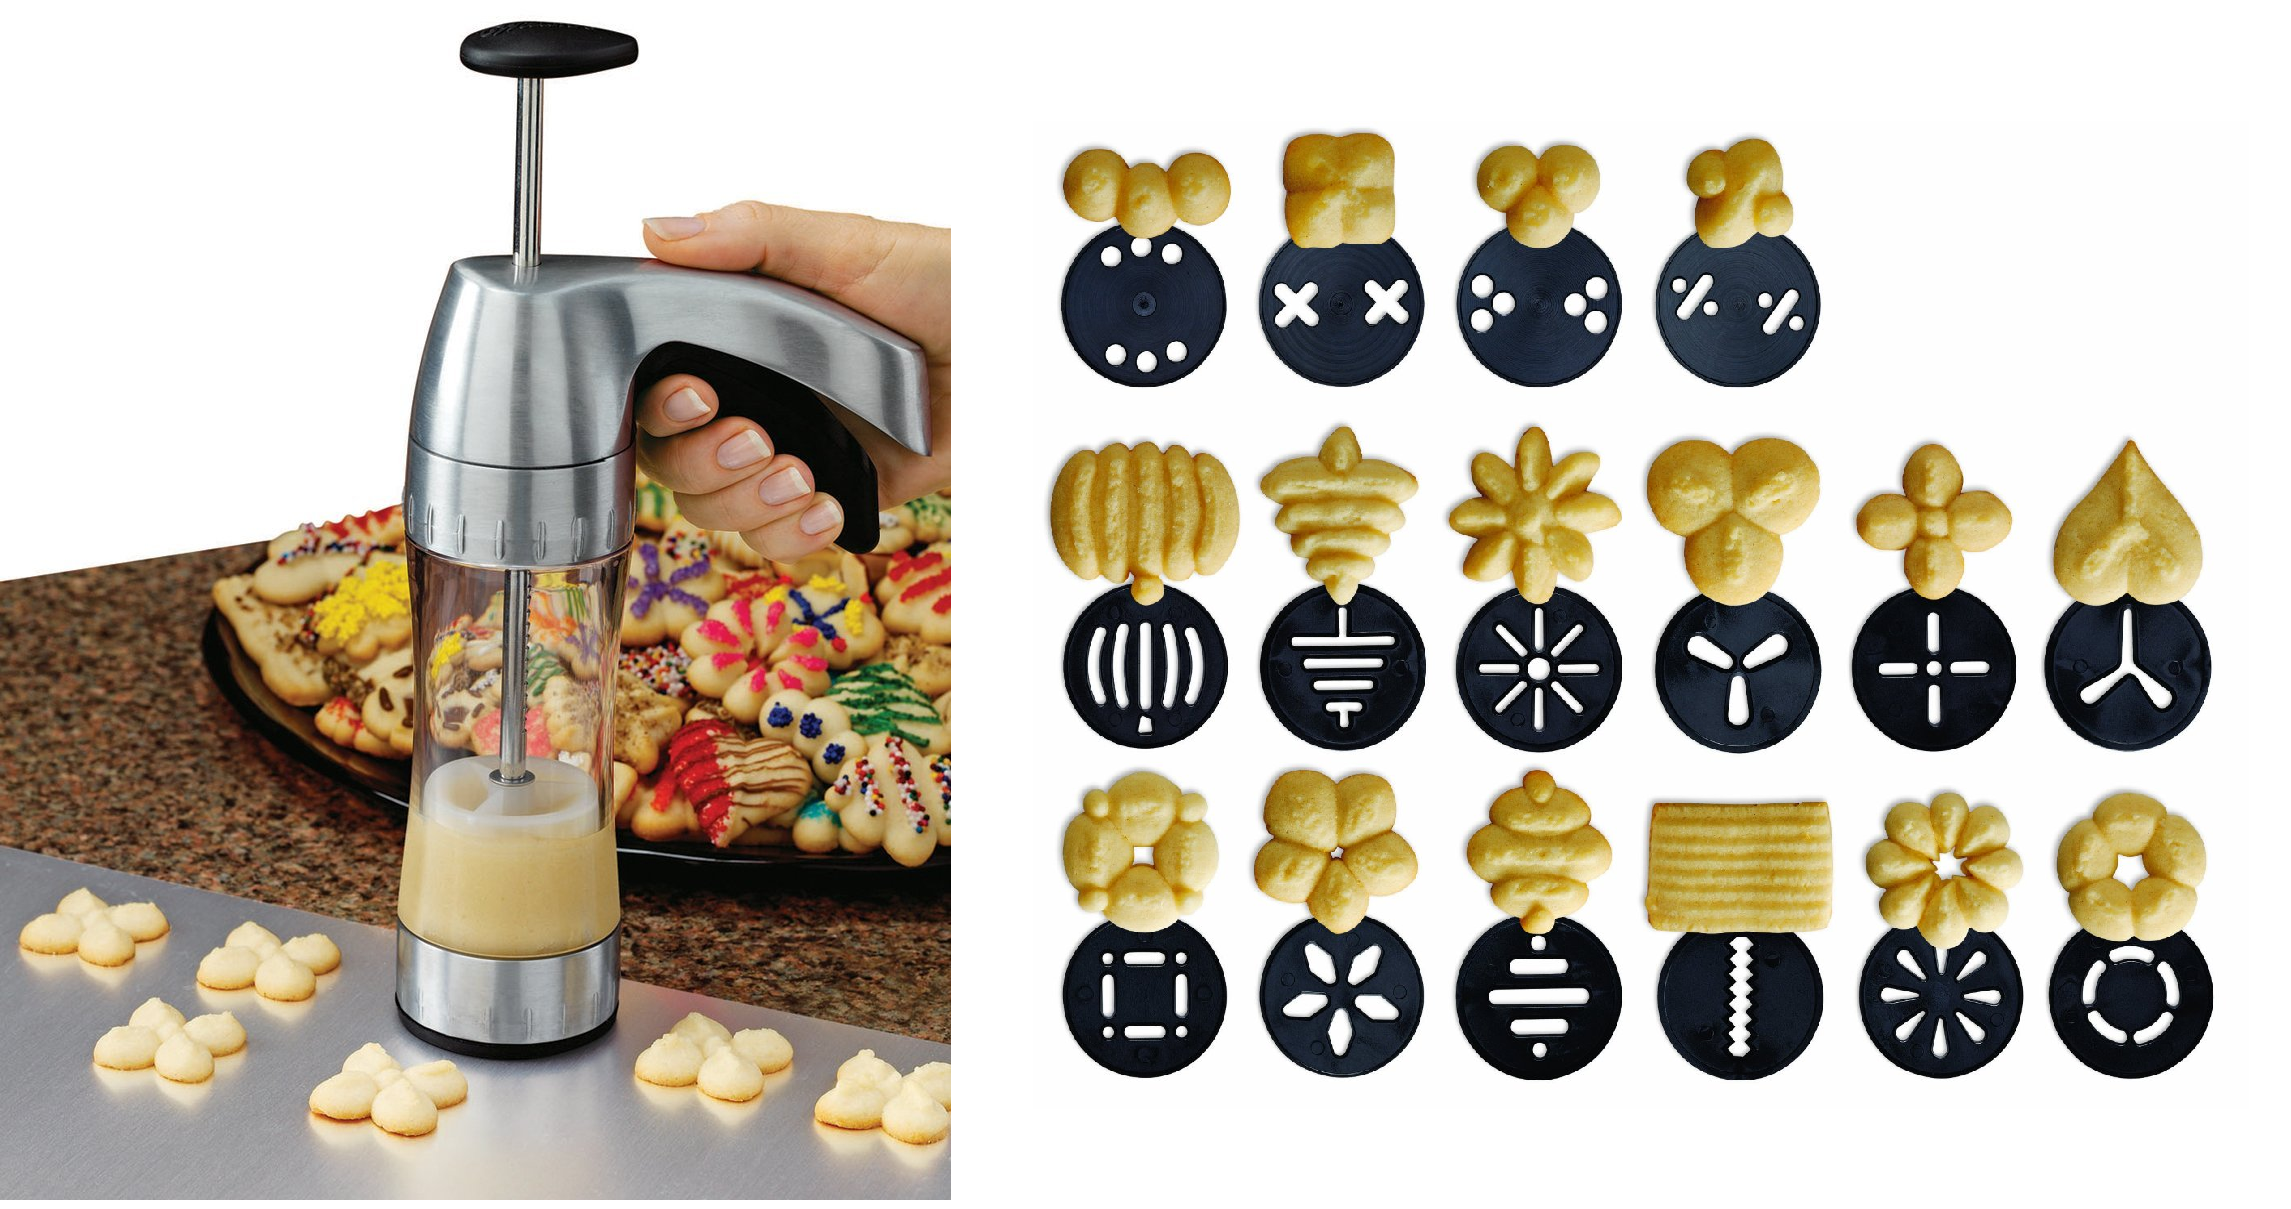 Wilton Cookie Pro Ultra II Cookie Press Only $9.99 on Amazon!